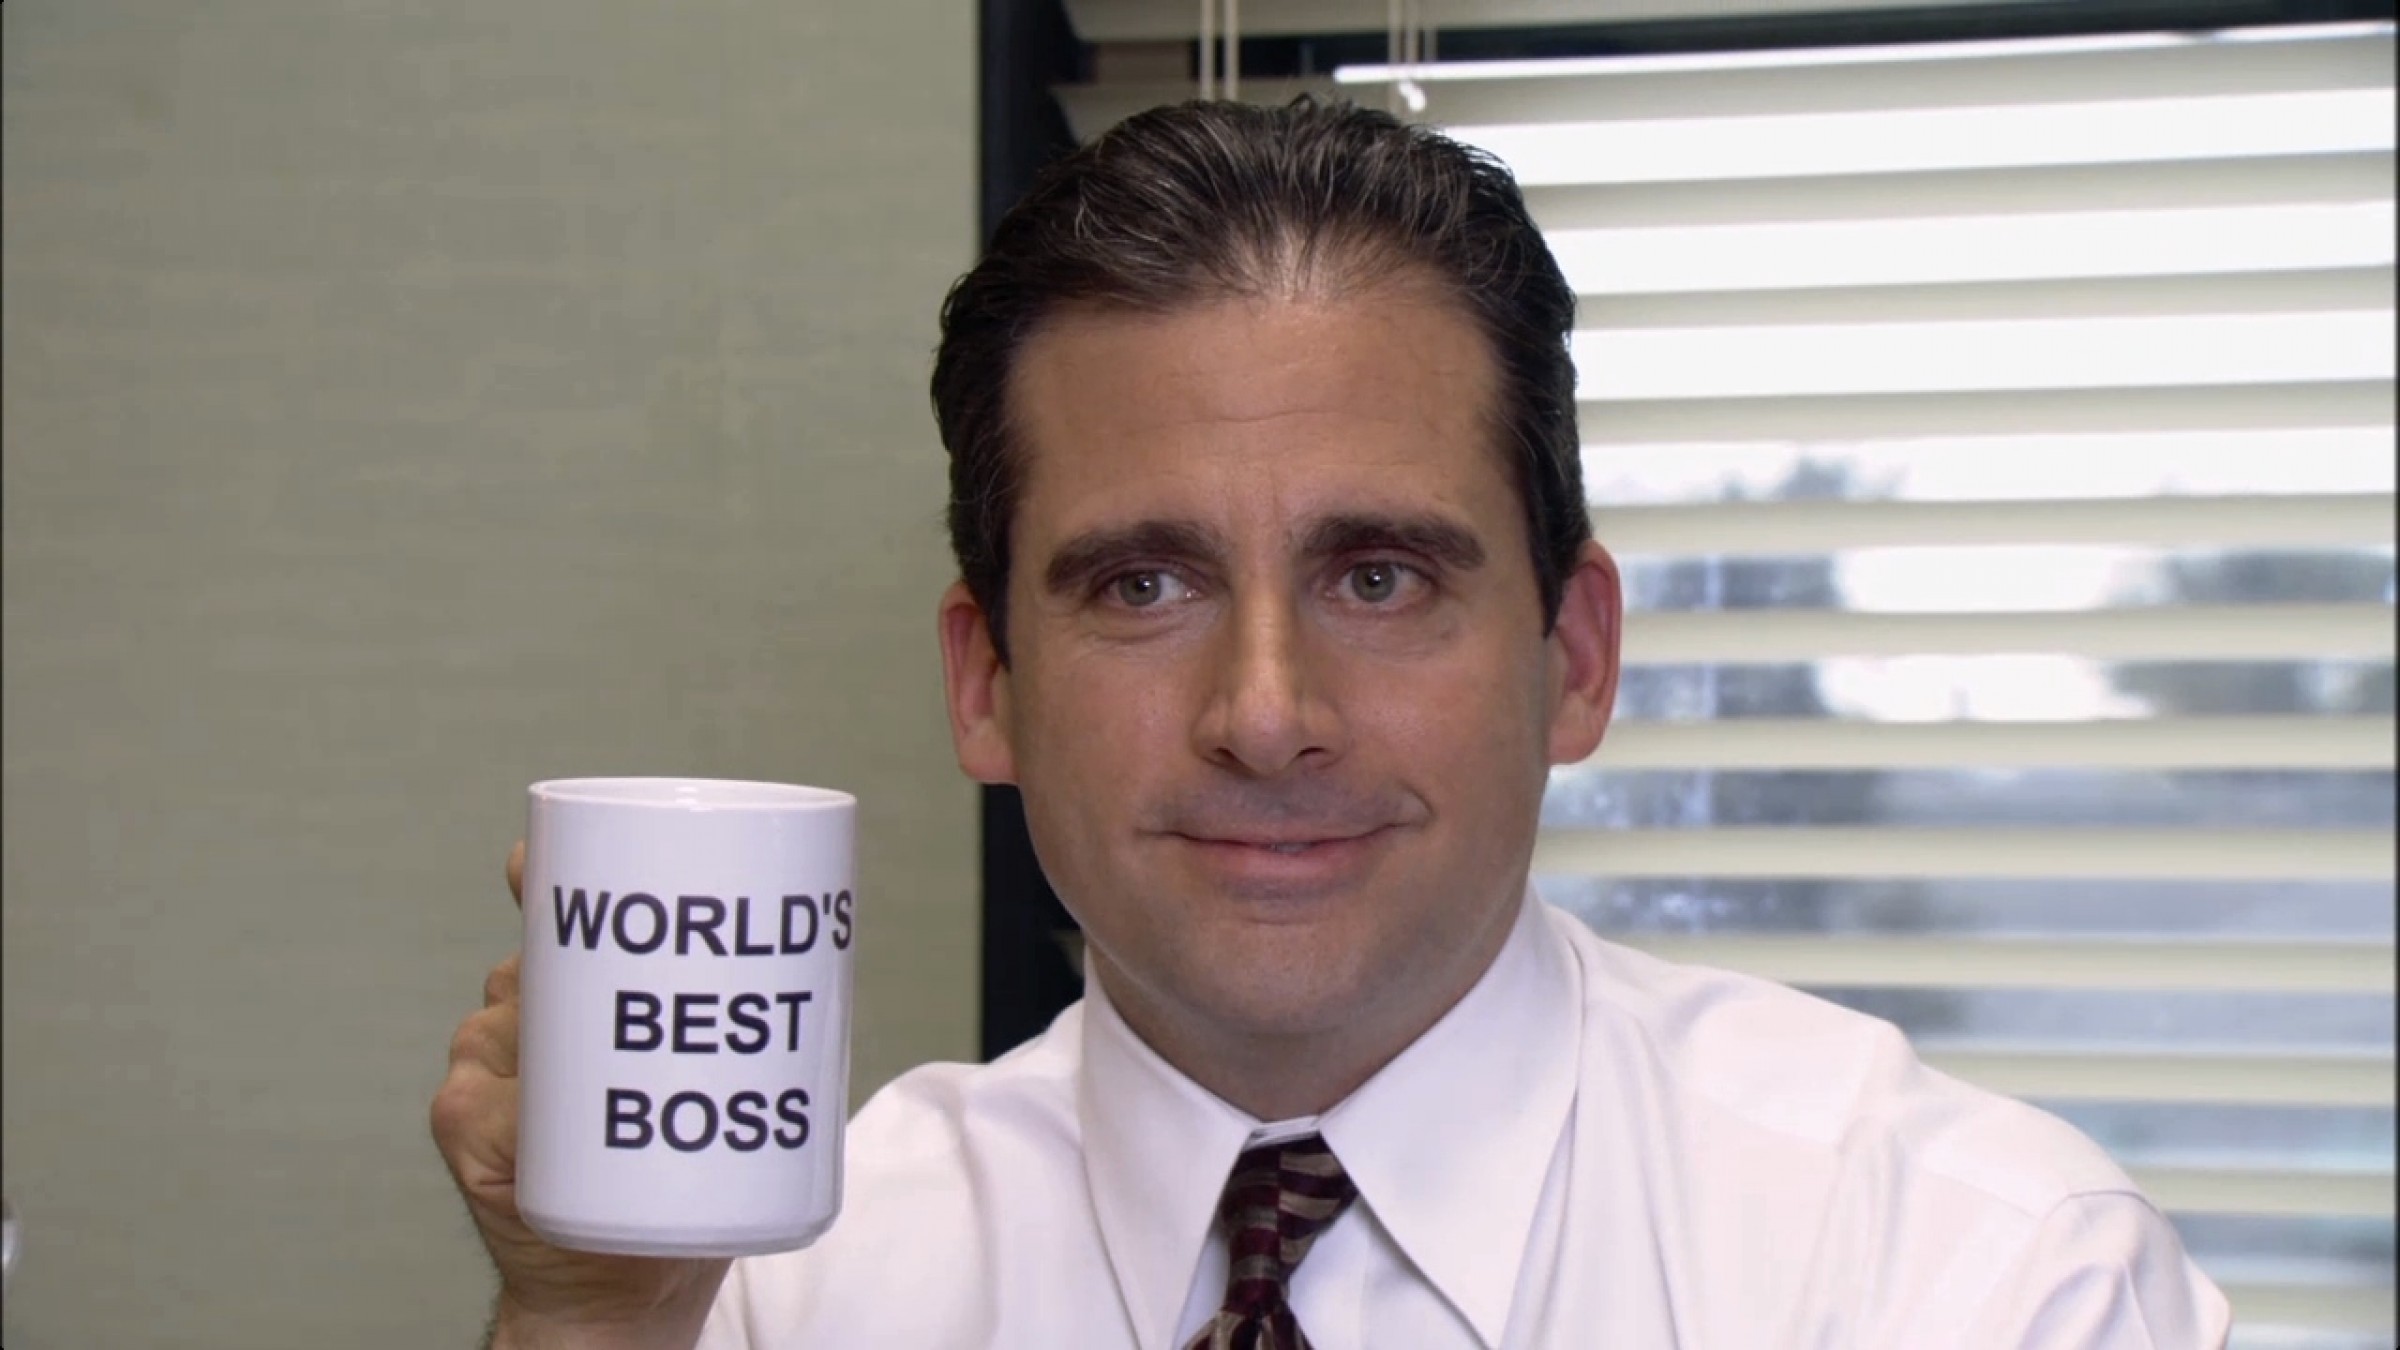 Michael Scott from The Office poses with his "World's Best Boss" coffee mug.